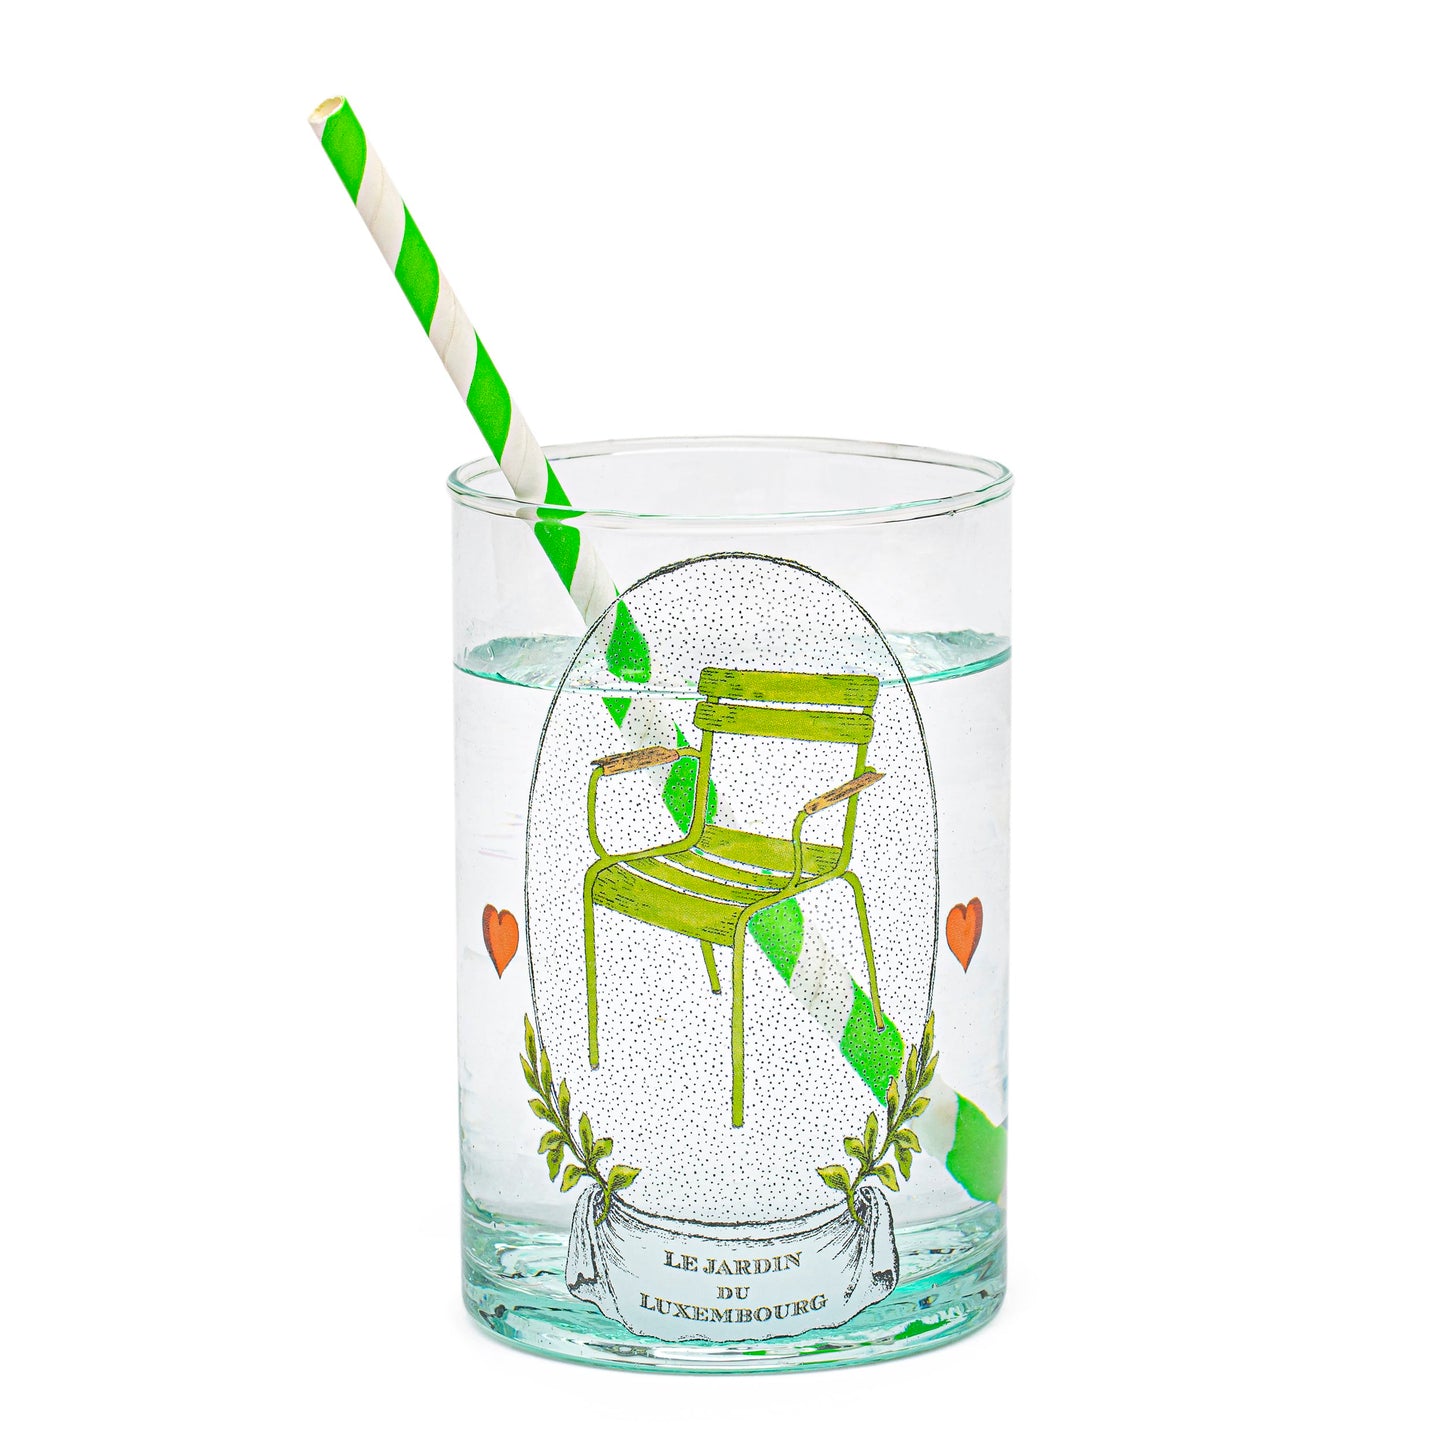 Illustrated glass | LUXEMBOURG GARDEN CHAIR